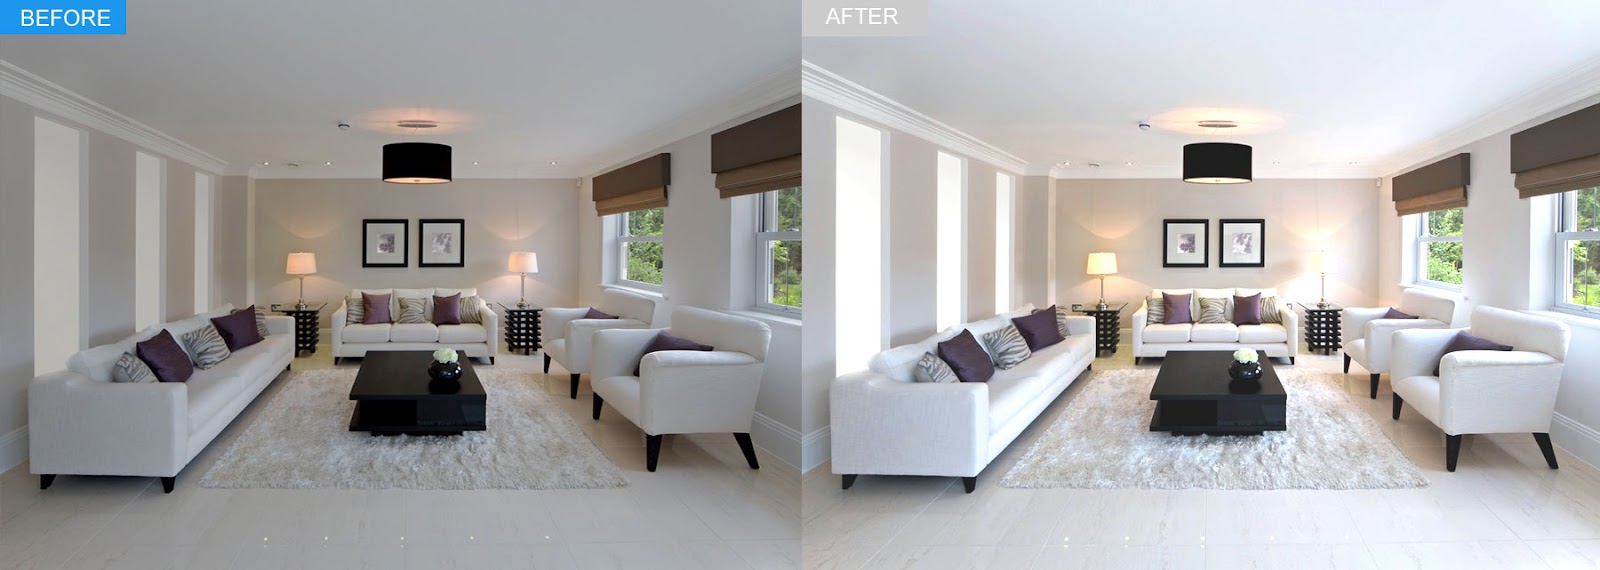 How to Edit Real Estate Photos That Sell - A Step-by-Step Guide